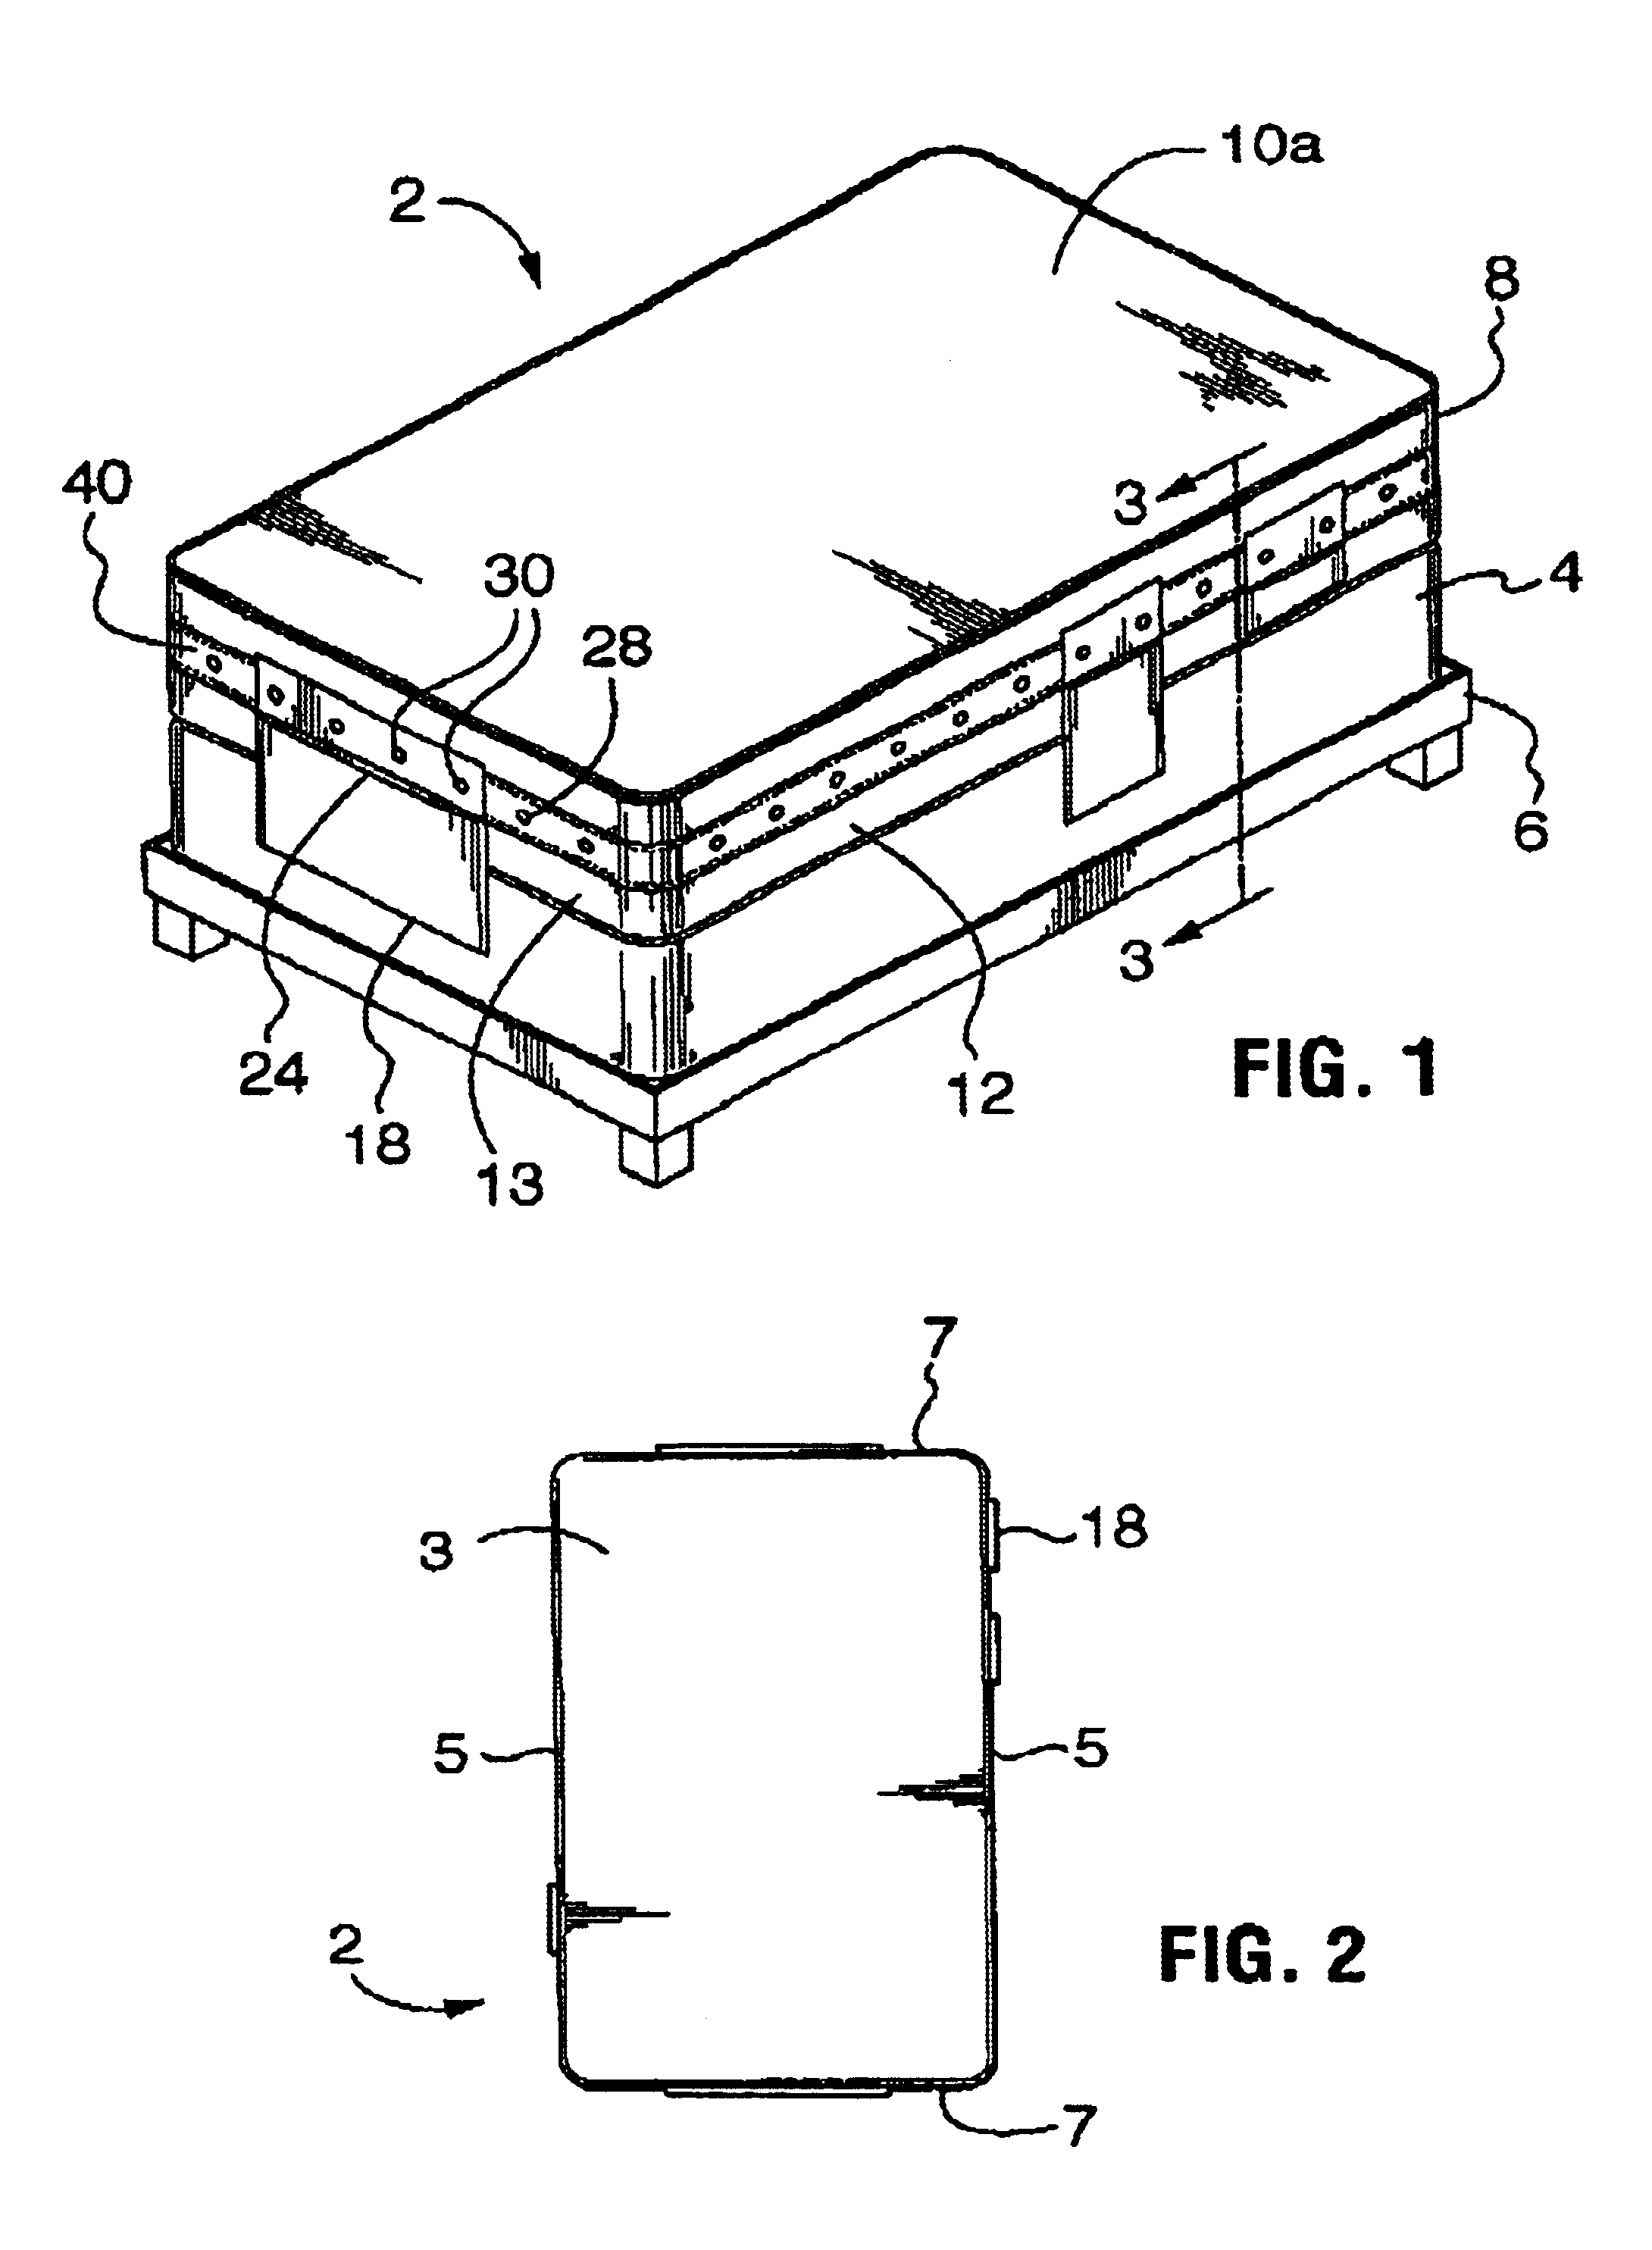 Bed covering fastening system